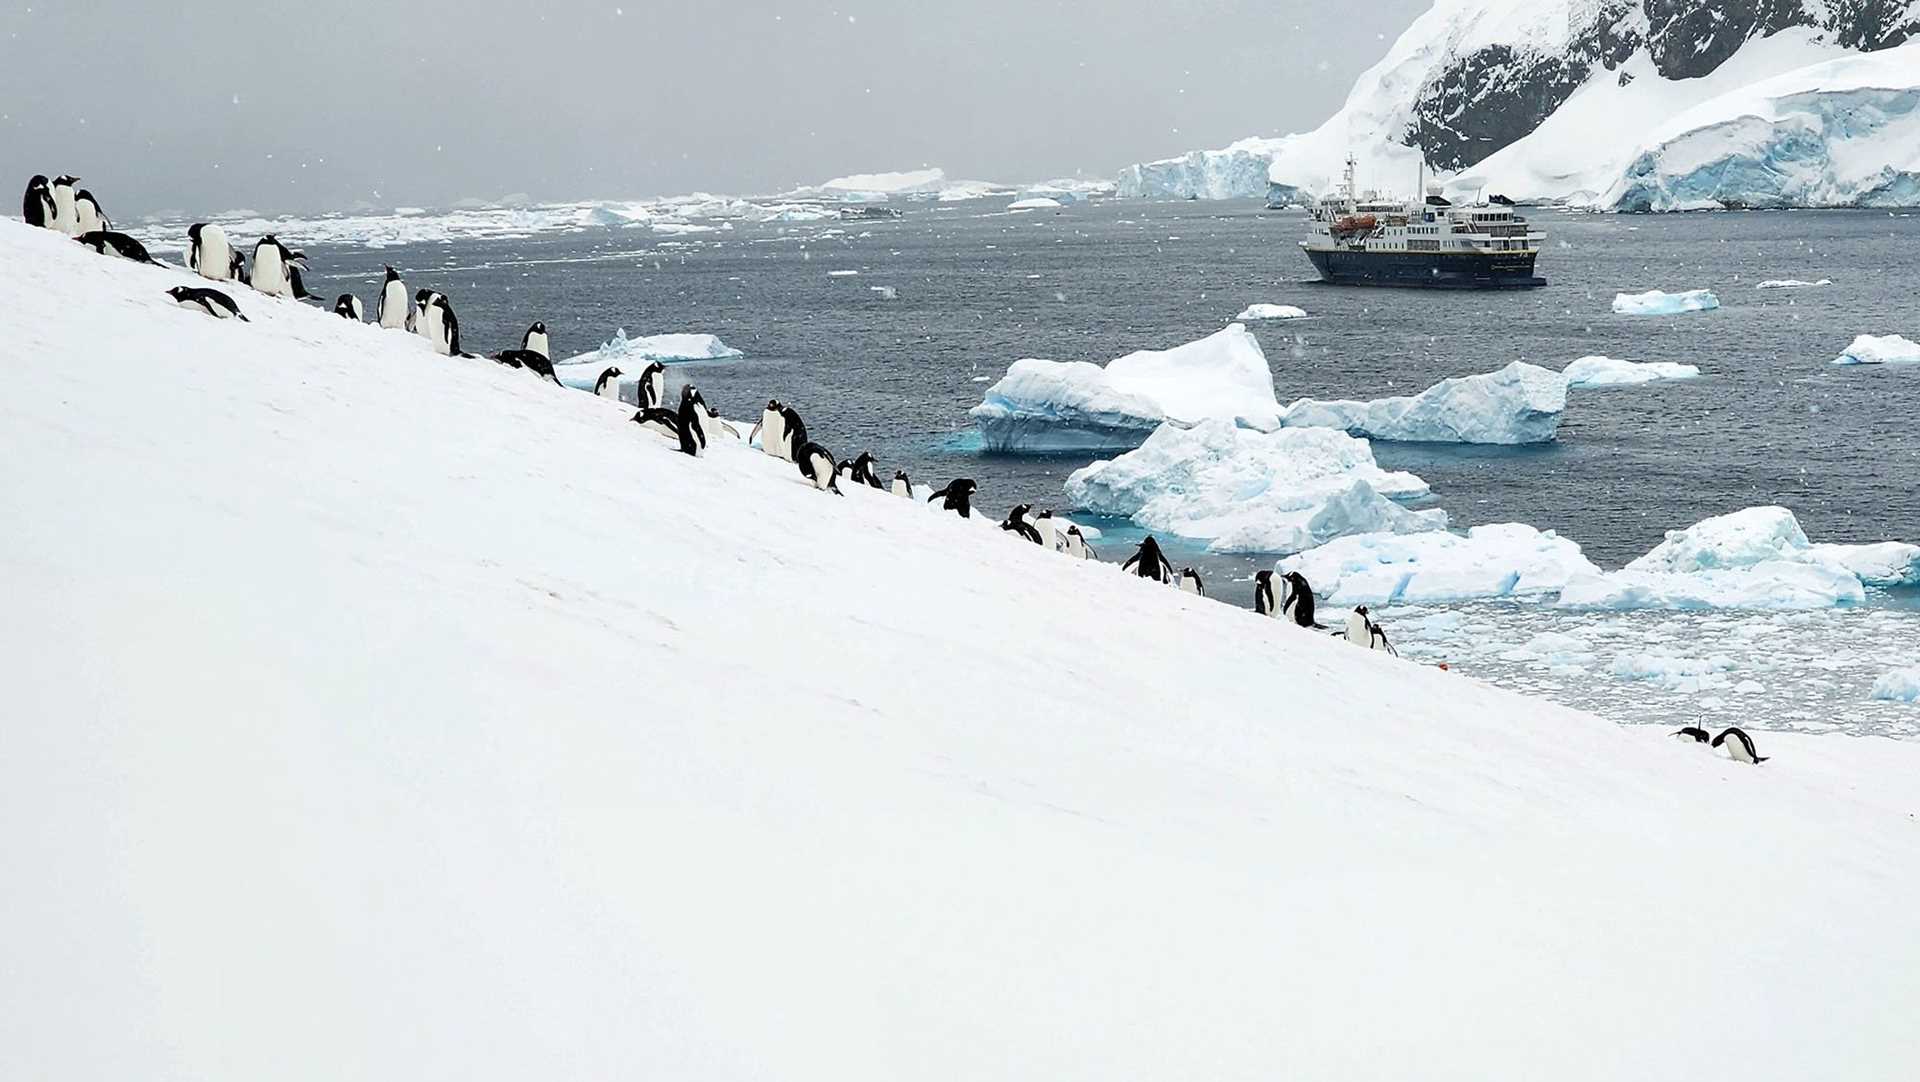 penguins marching up a hill with a ship in the background